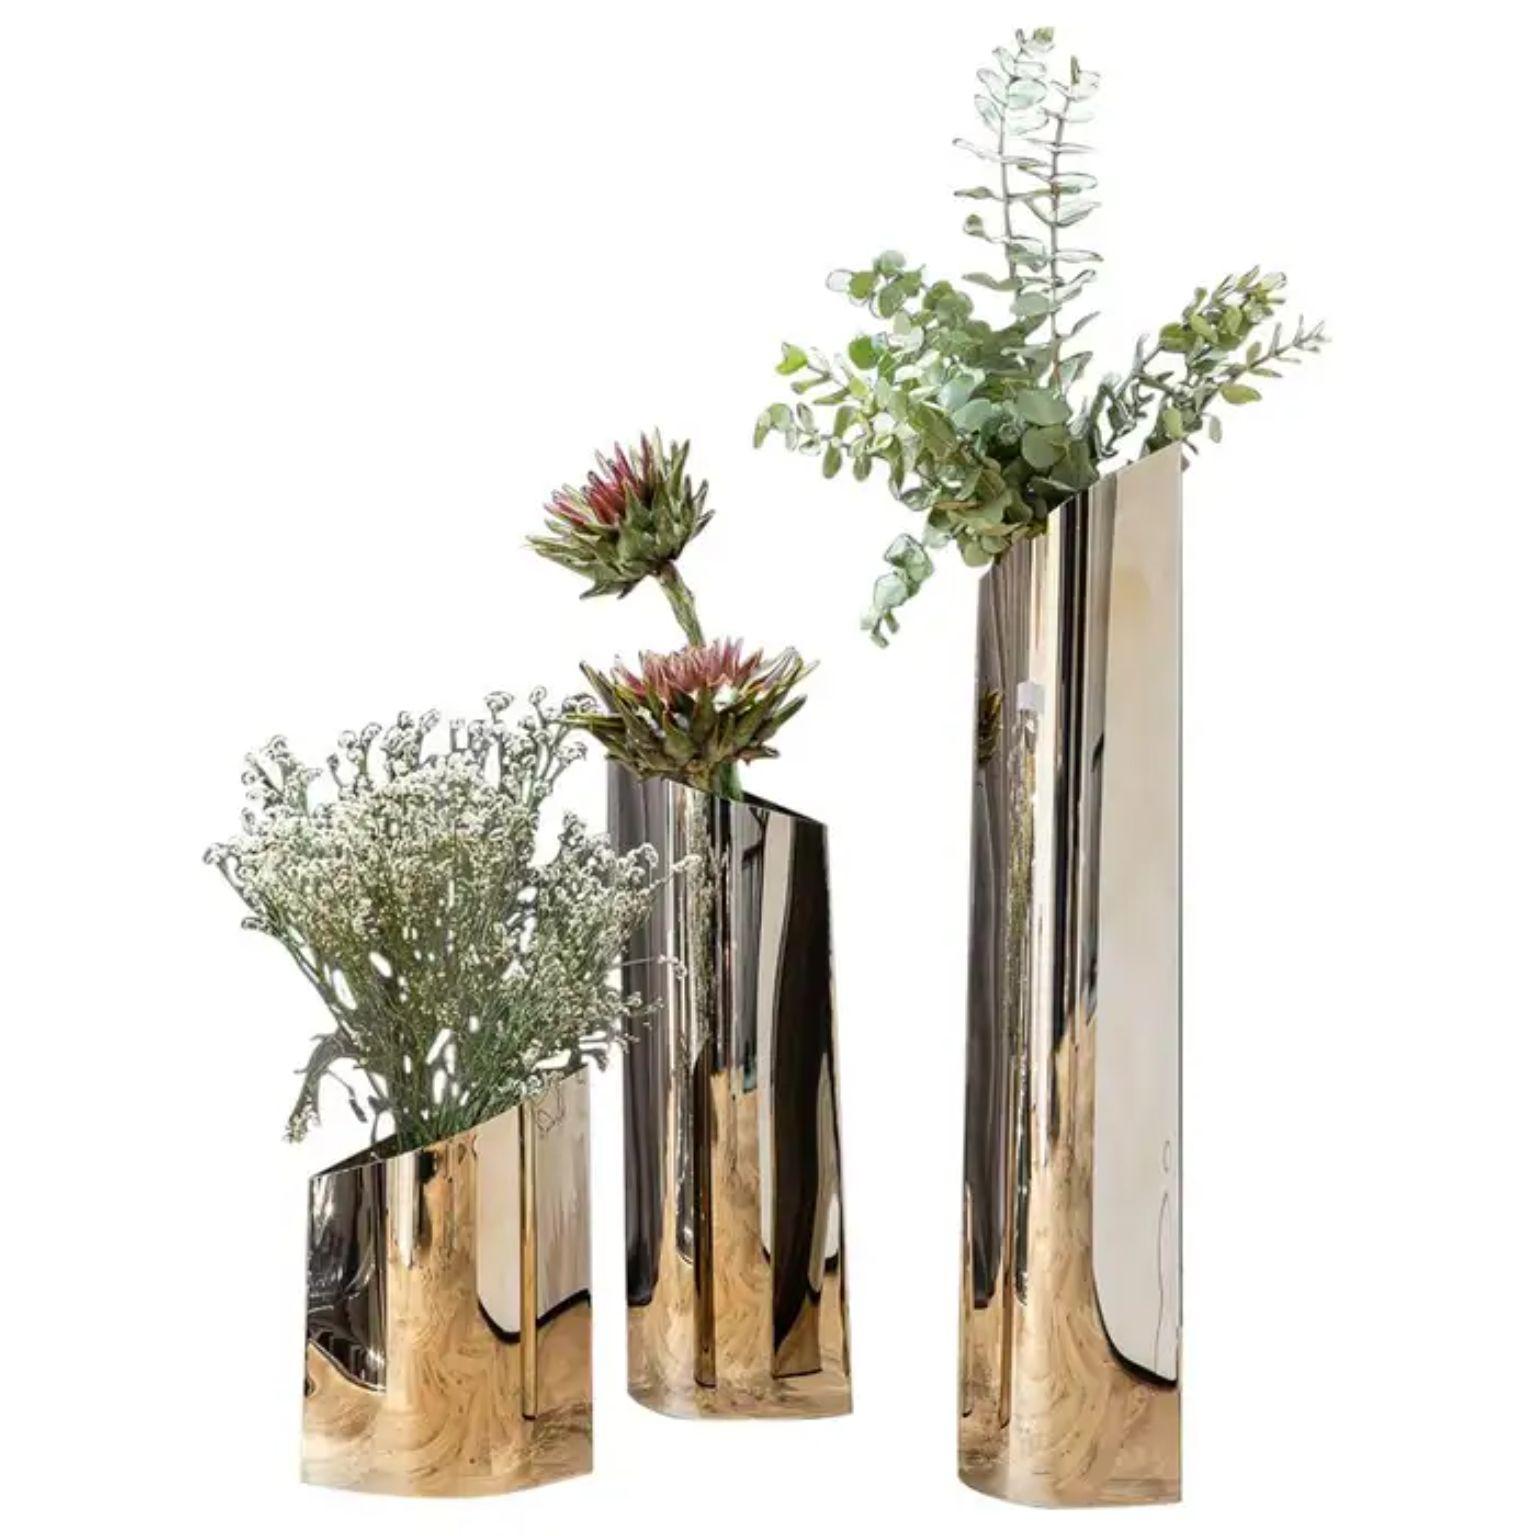 Set of 3 Flamed Gold Parova L Vases by Zieta
Dimensions: Vase L35:  D 17 x W 24 x H 35 cm.
Vase L60:  D 20 x W 22 x H 60 cm.
Vase L85: D 13 x W 19 x H 85 cm.
Materials: Flamed gold stainless steel.

Zietas main goal is to deliver uniqueness and